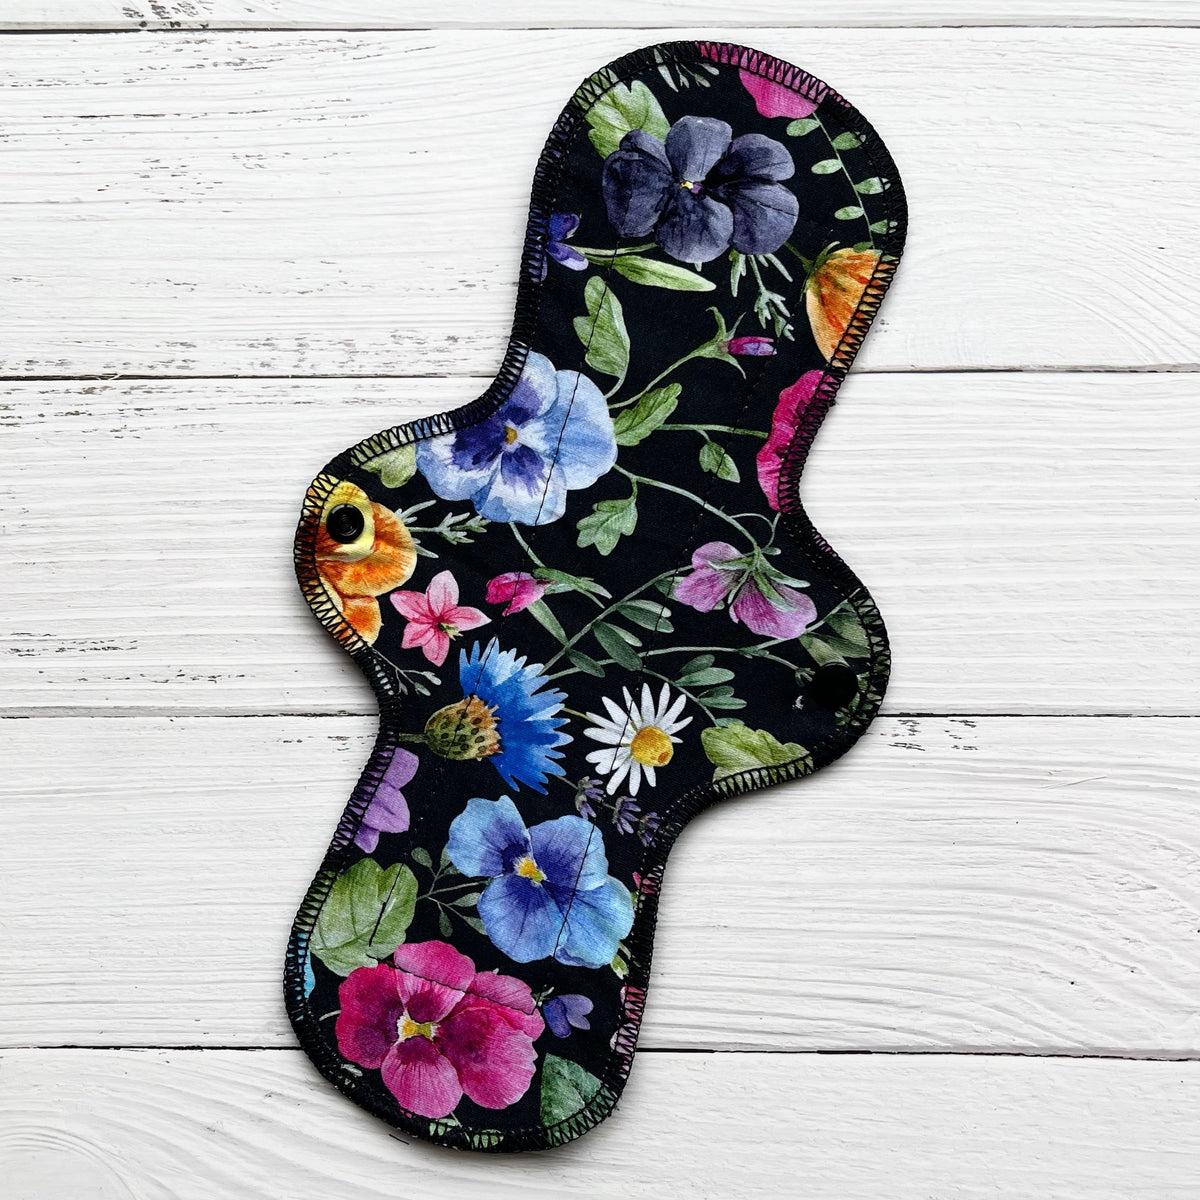 12 inch reusable pad with a bold pansy on black print on a rustic wood background